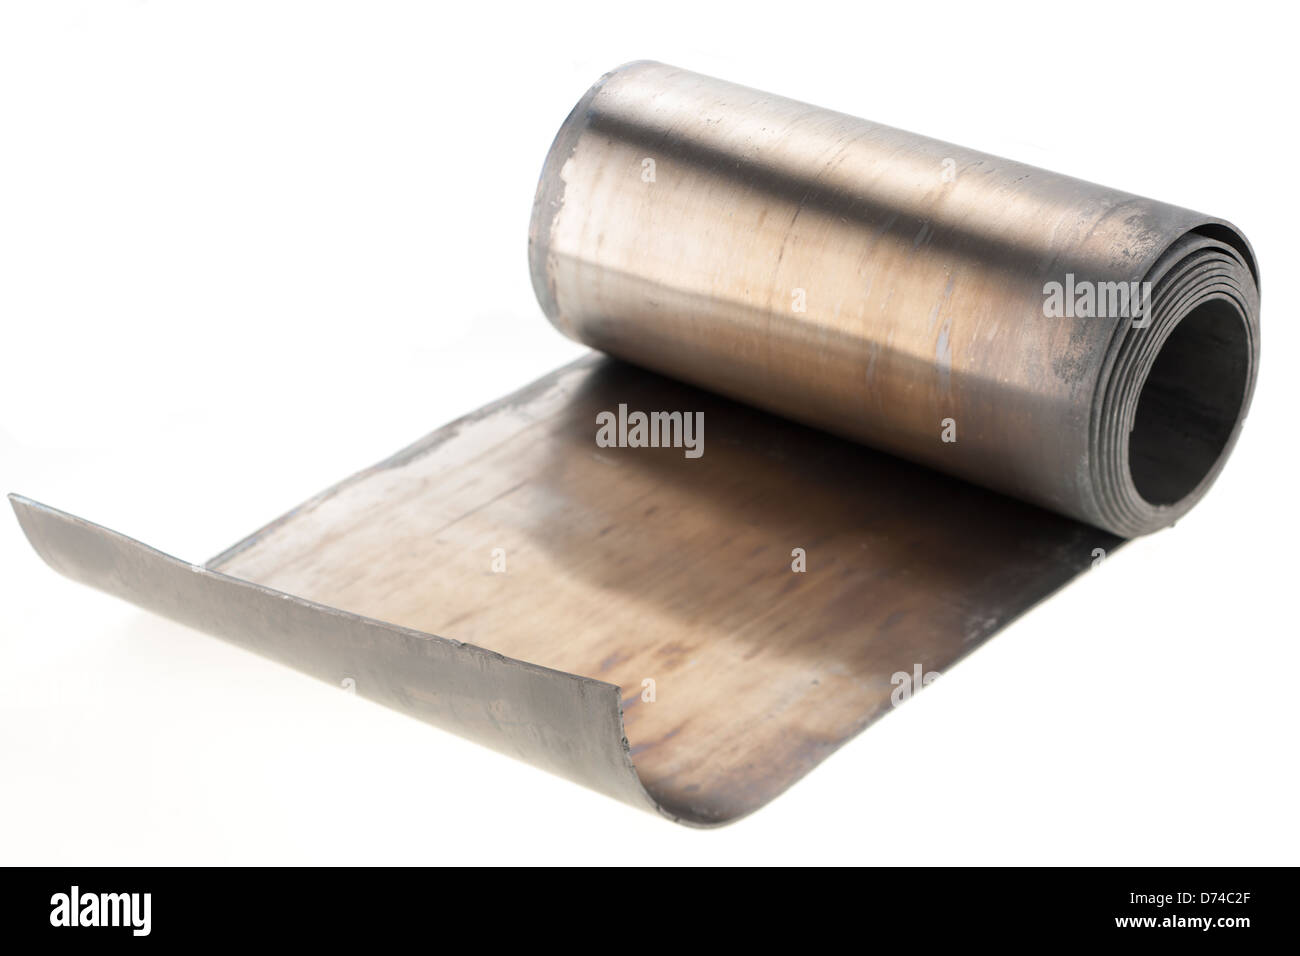 Half a roll of CODE 4 milled lead 240mm wide Stock Photo